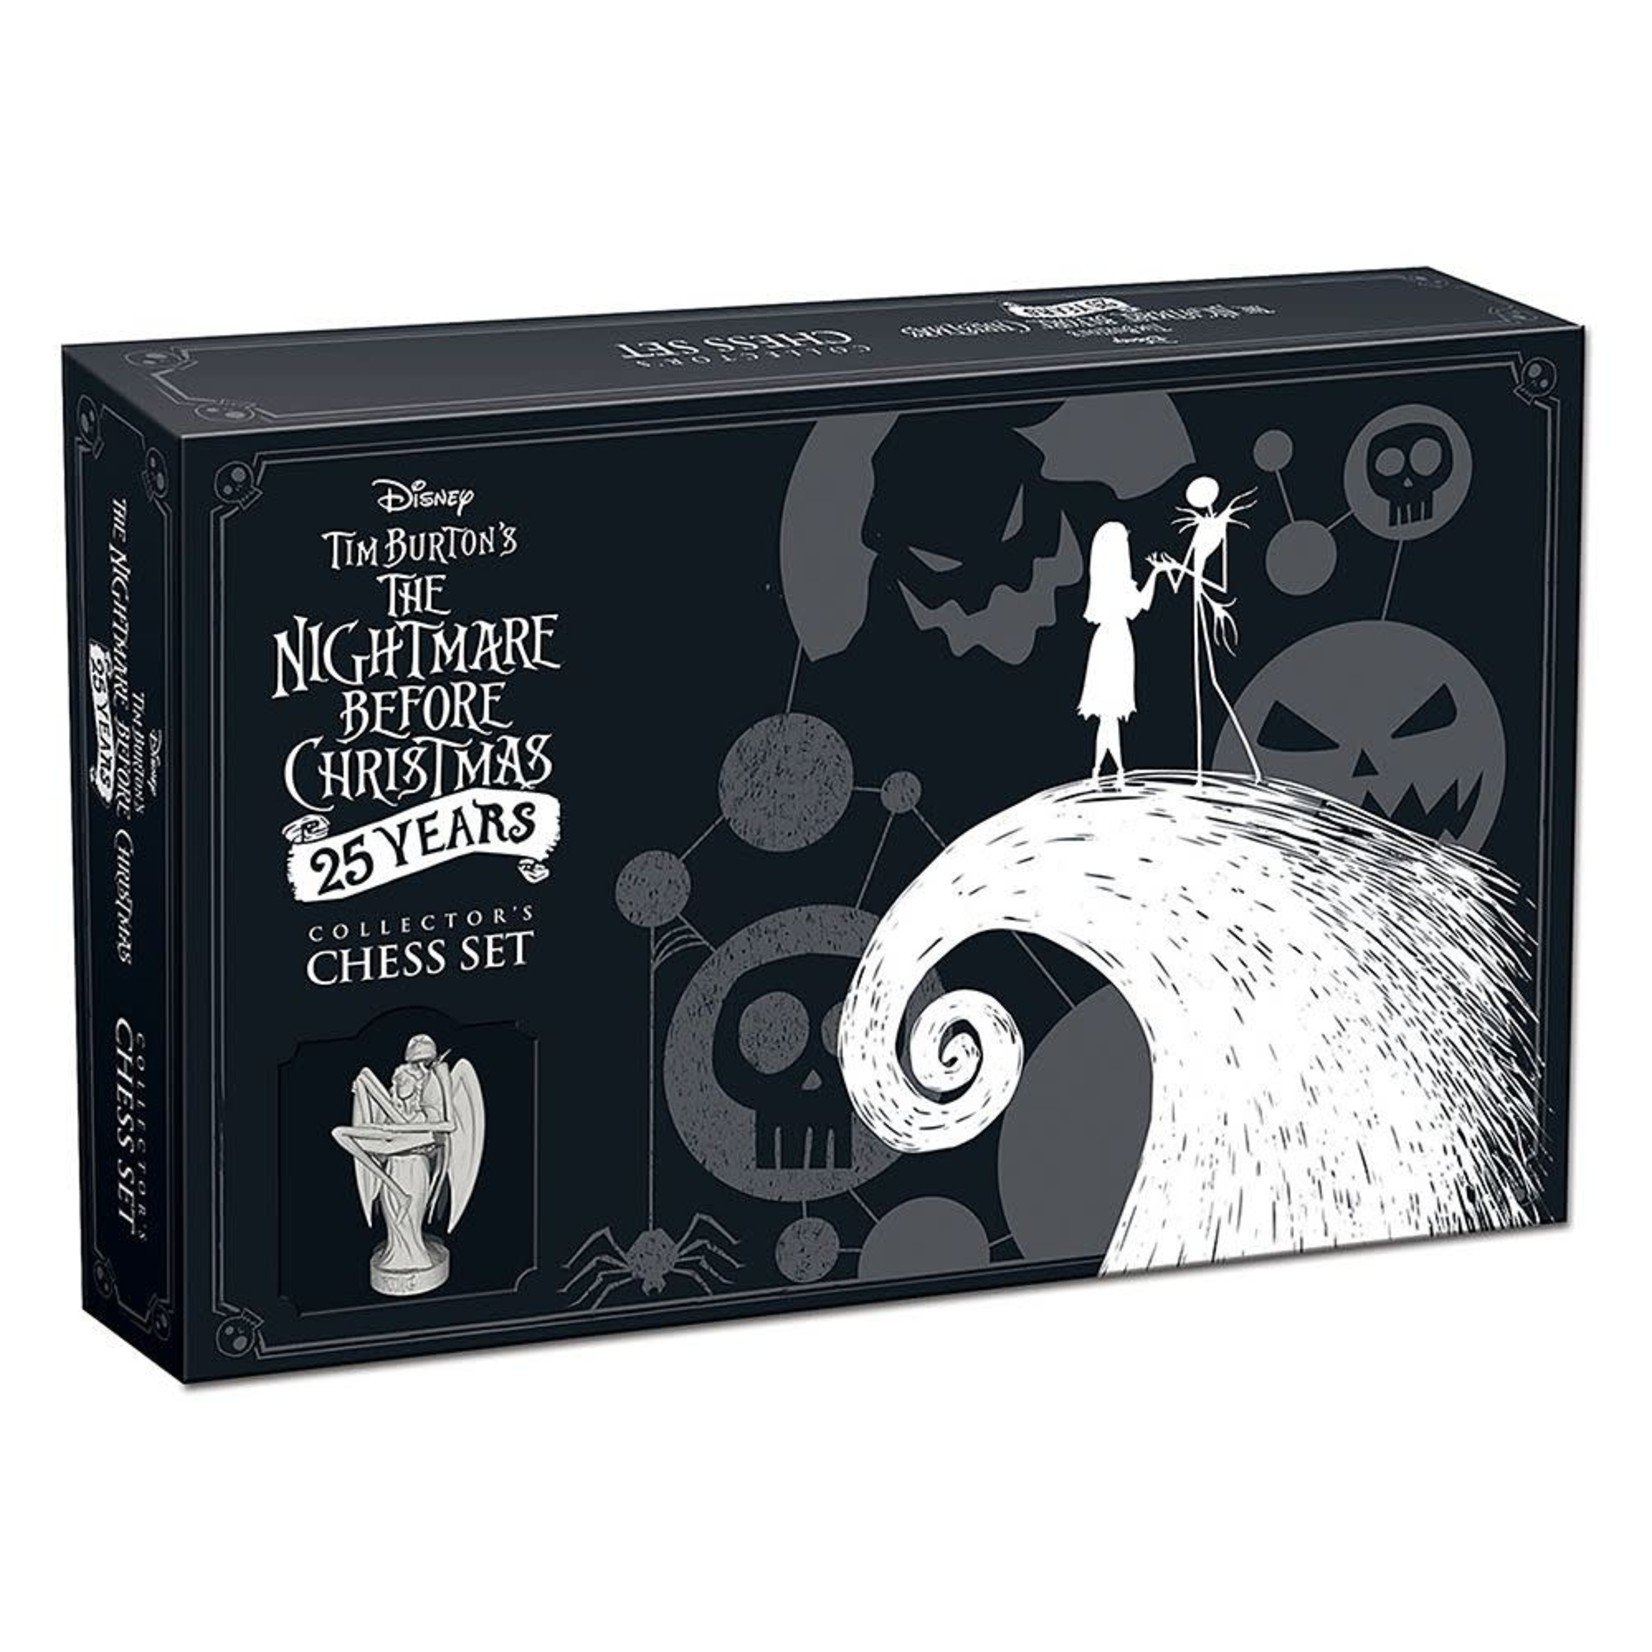 Chess Set: The Nightmare Before Christmas 25 Years Collector's Chess Set